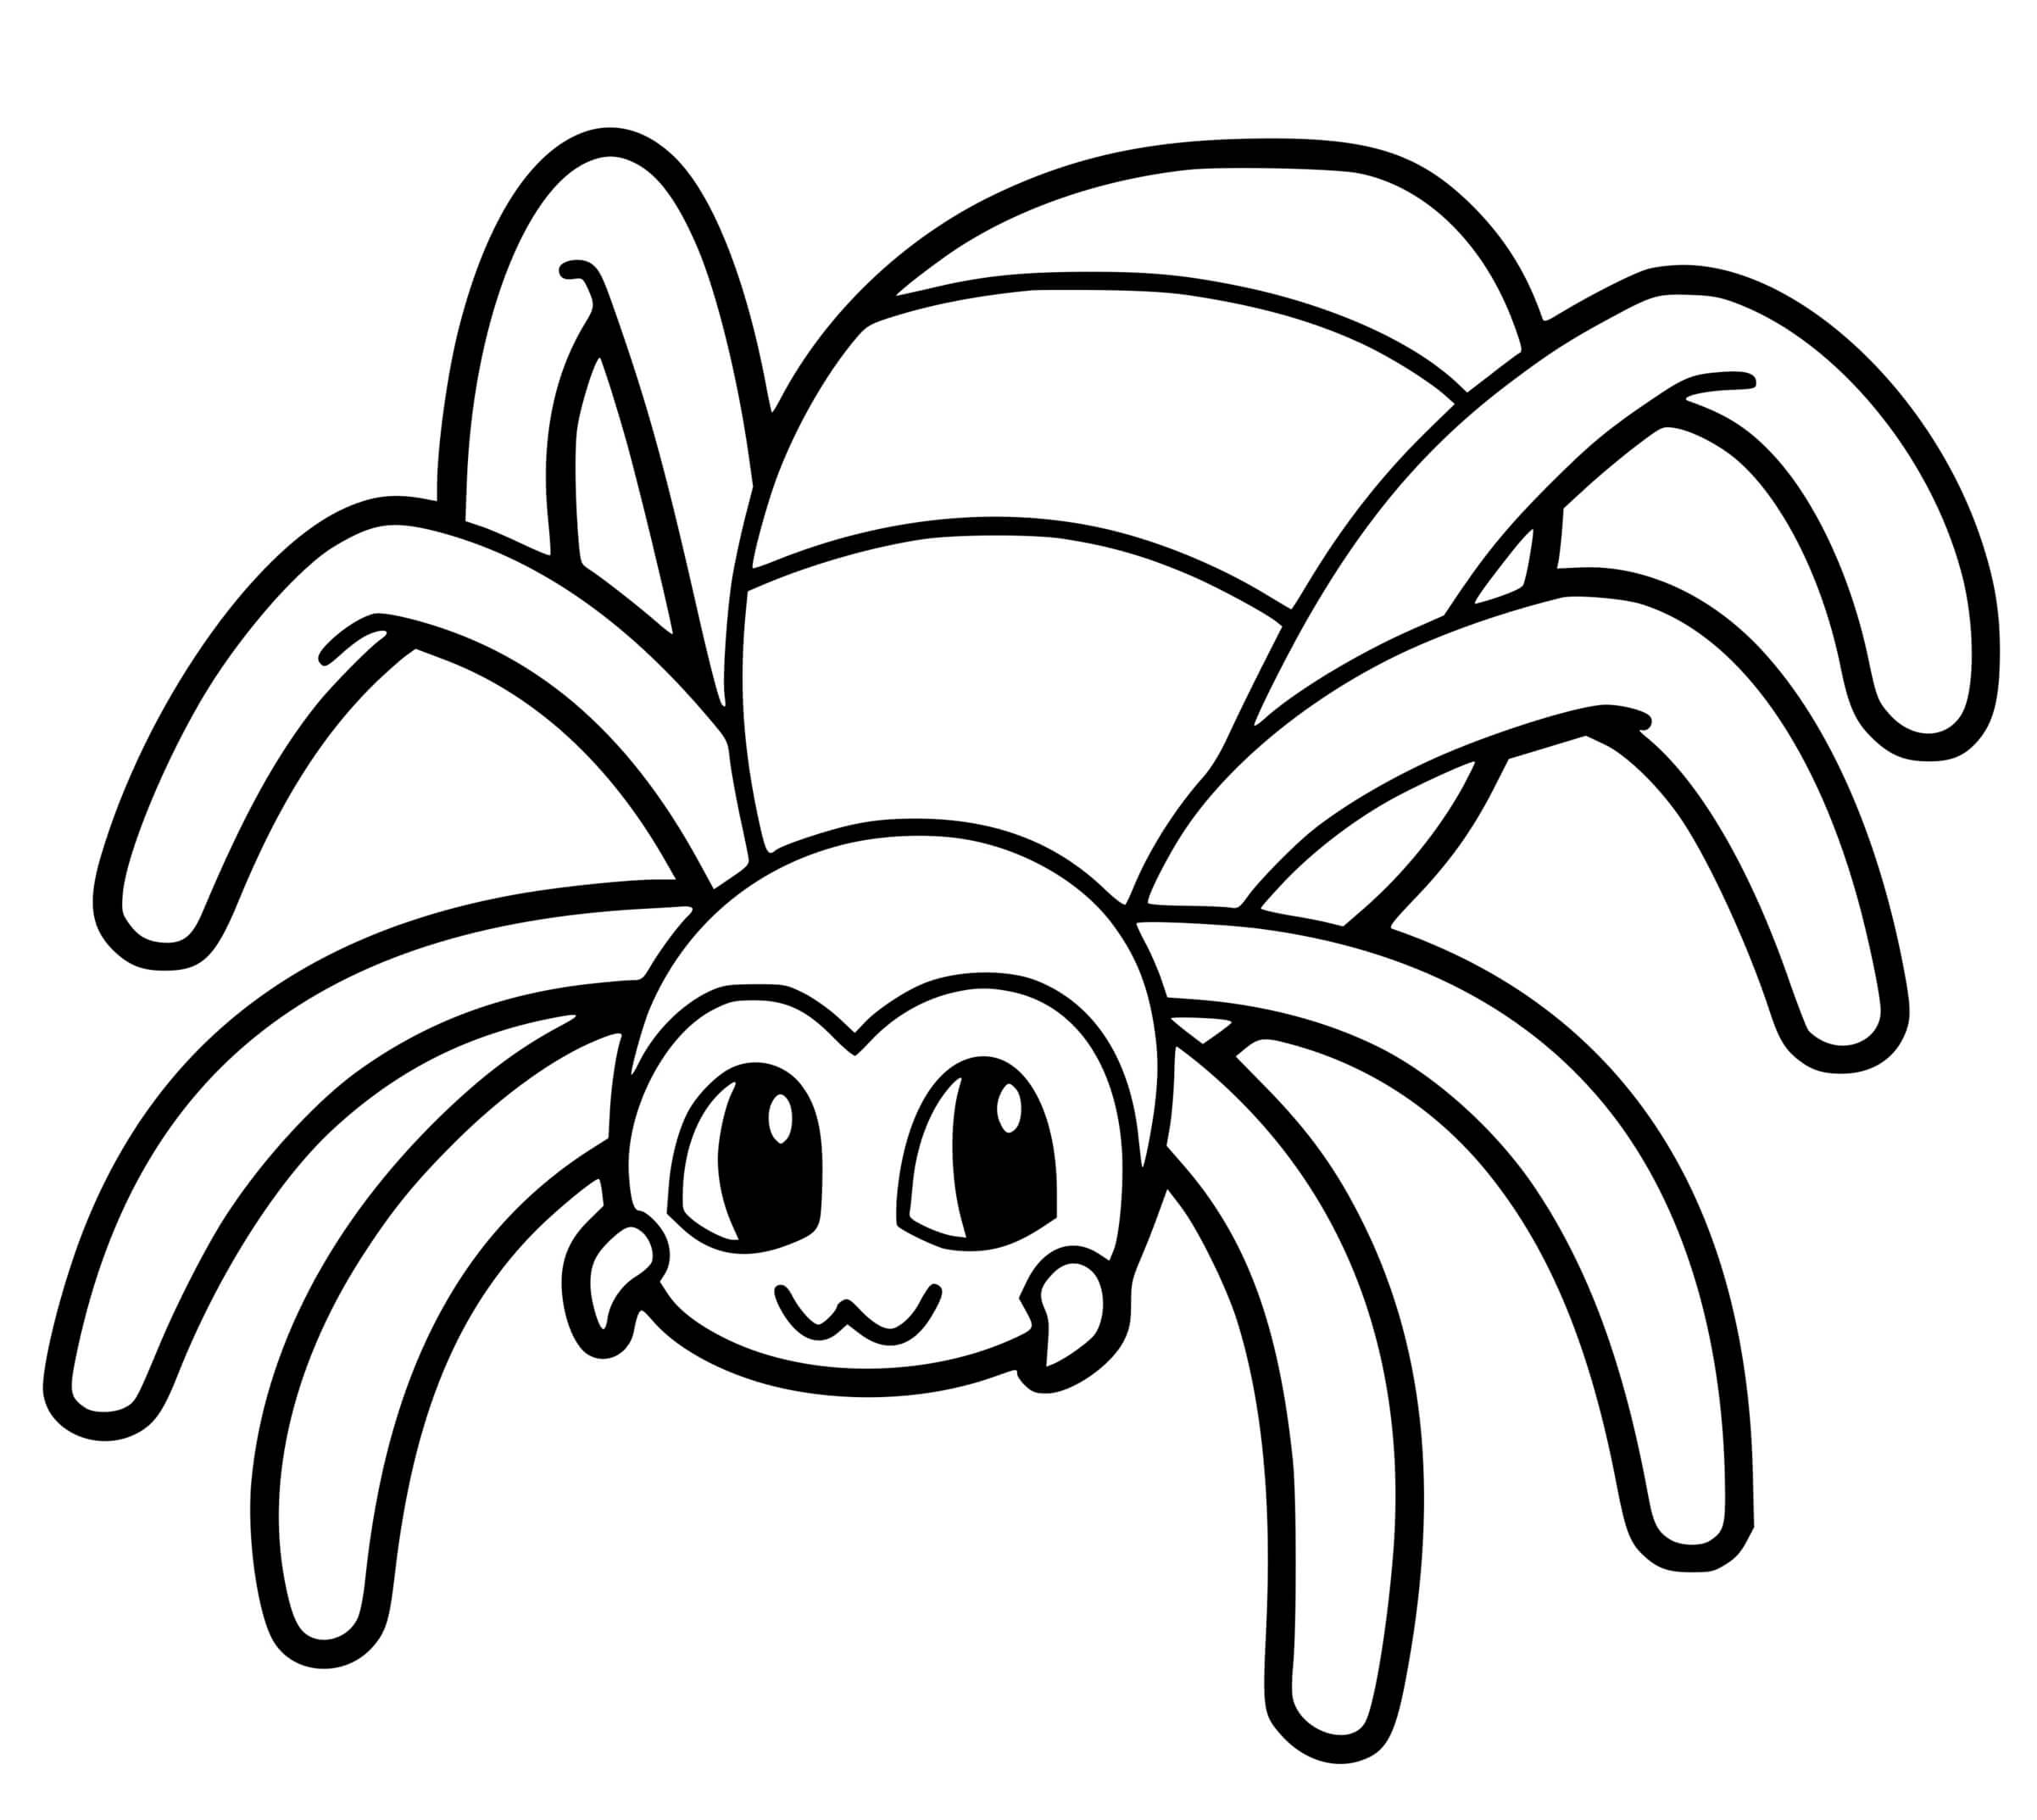 Baby Spider for Kids Coloring Pages - SheetalColor.com